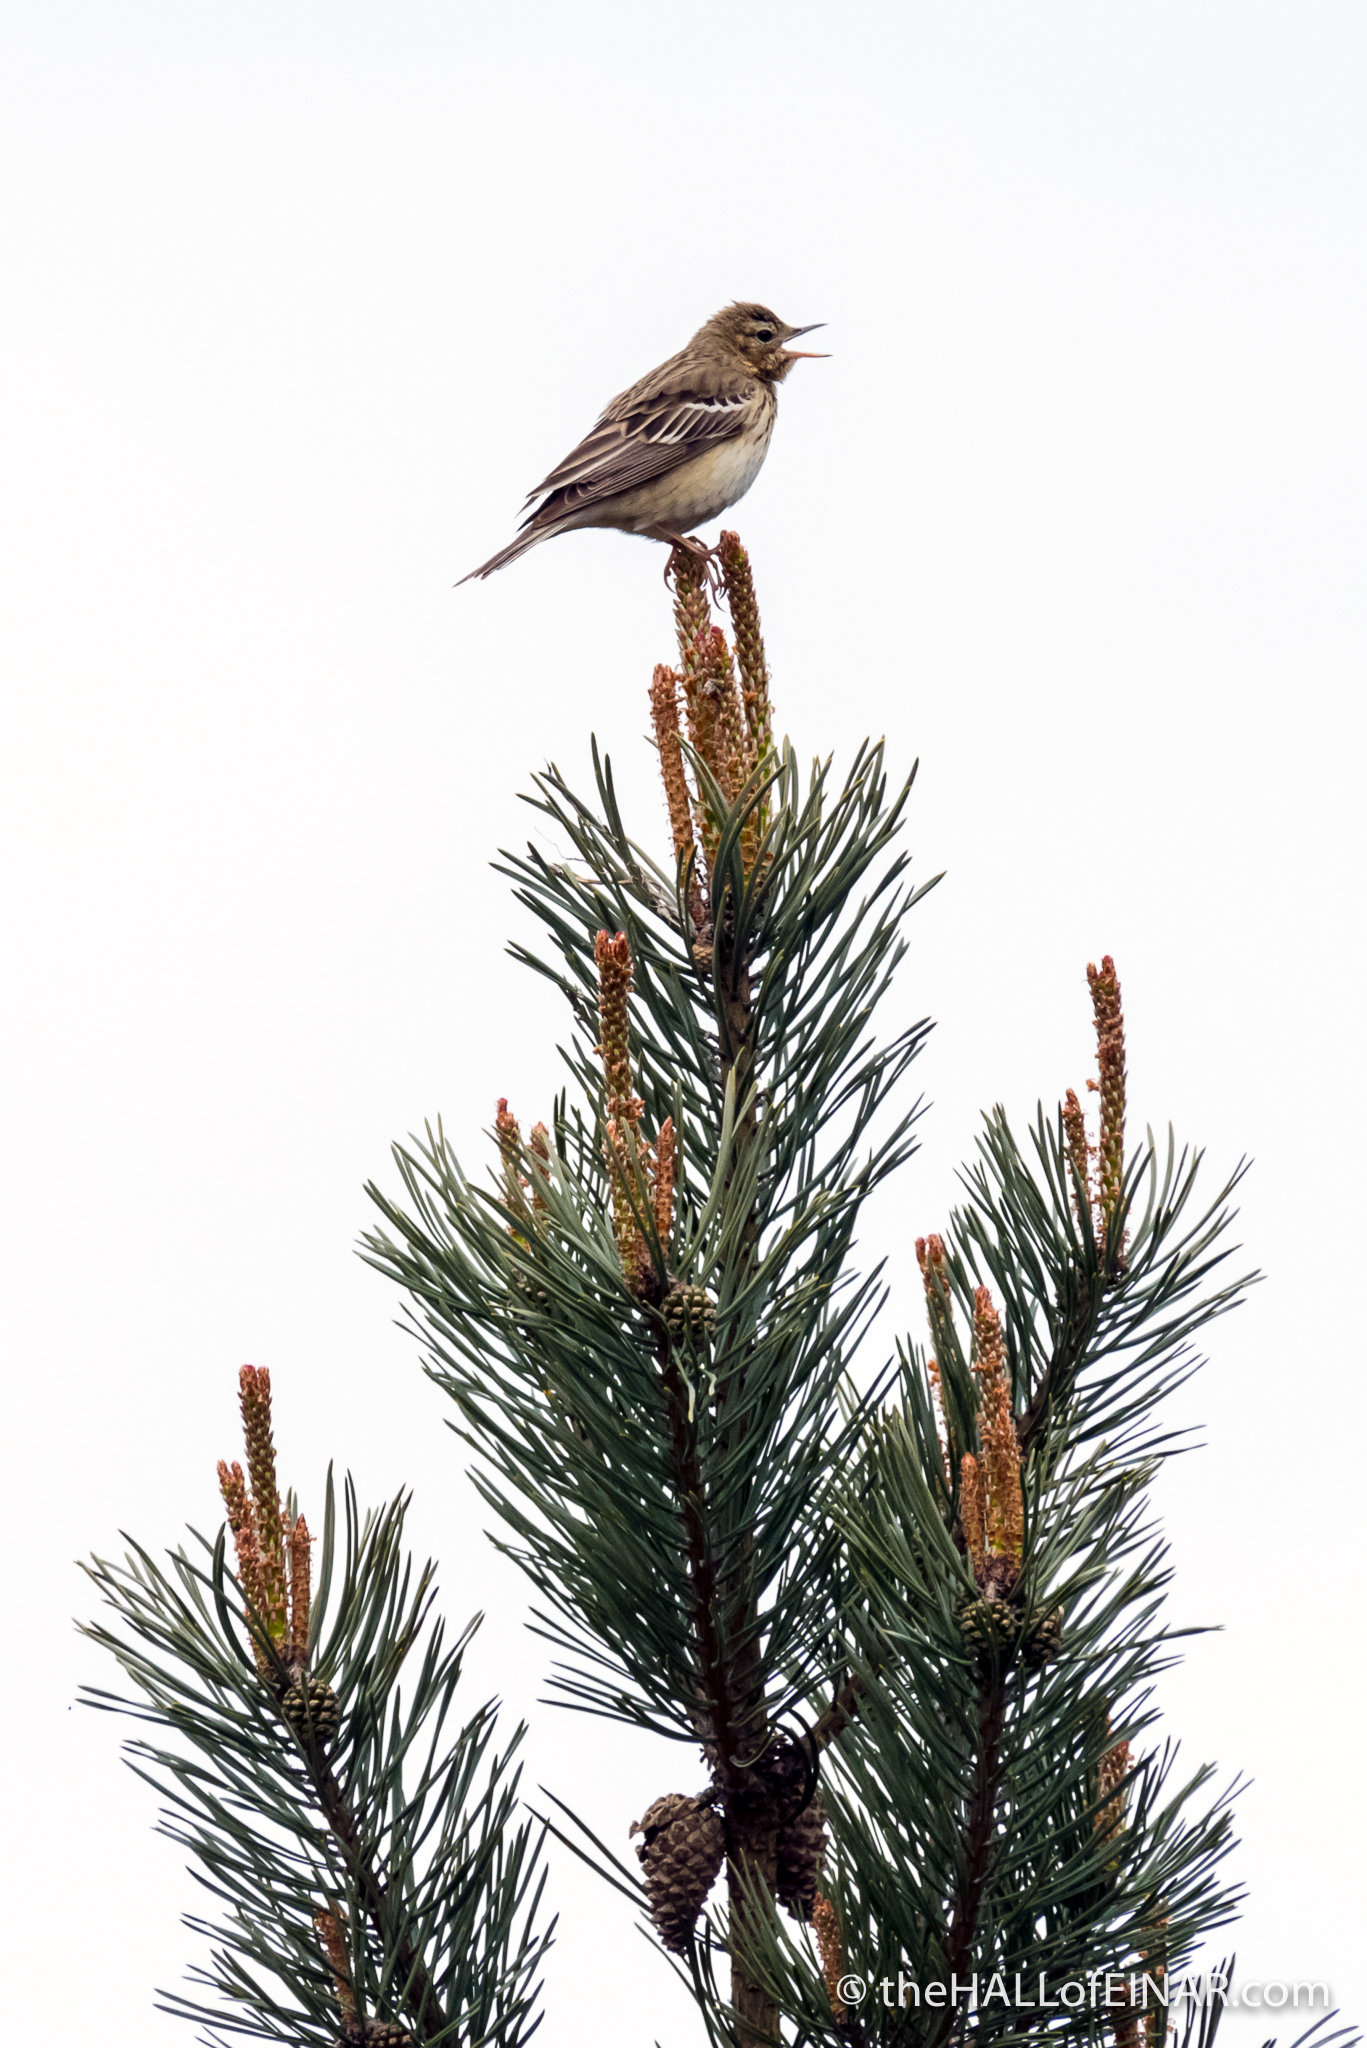 Tree Pipit - The Hall of Einar - photograph (c) David Bailey (not the)